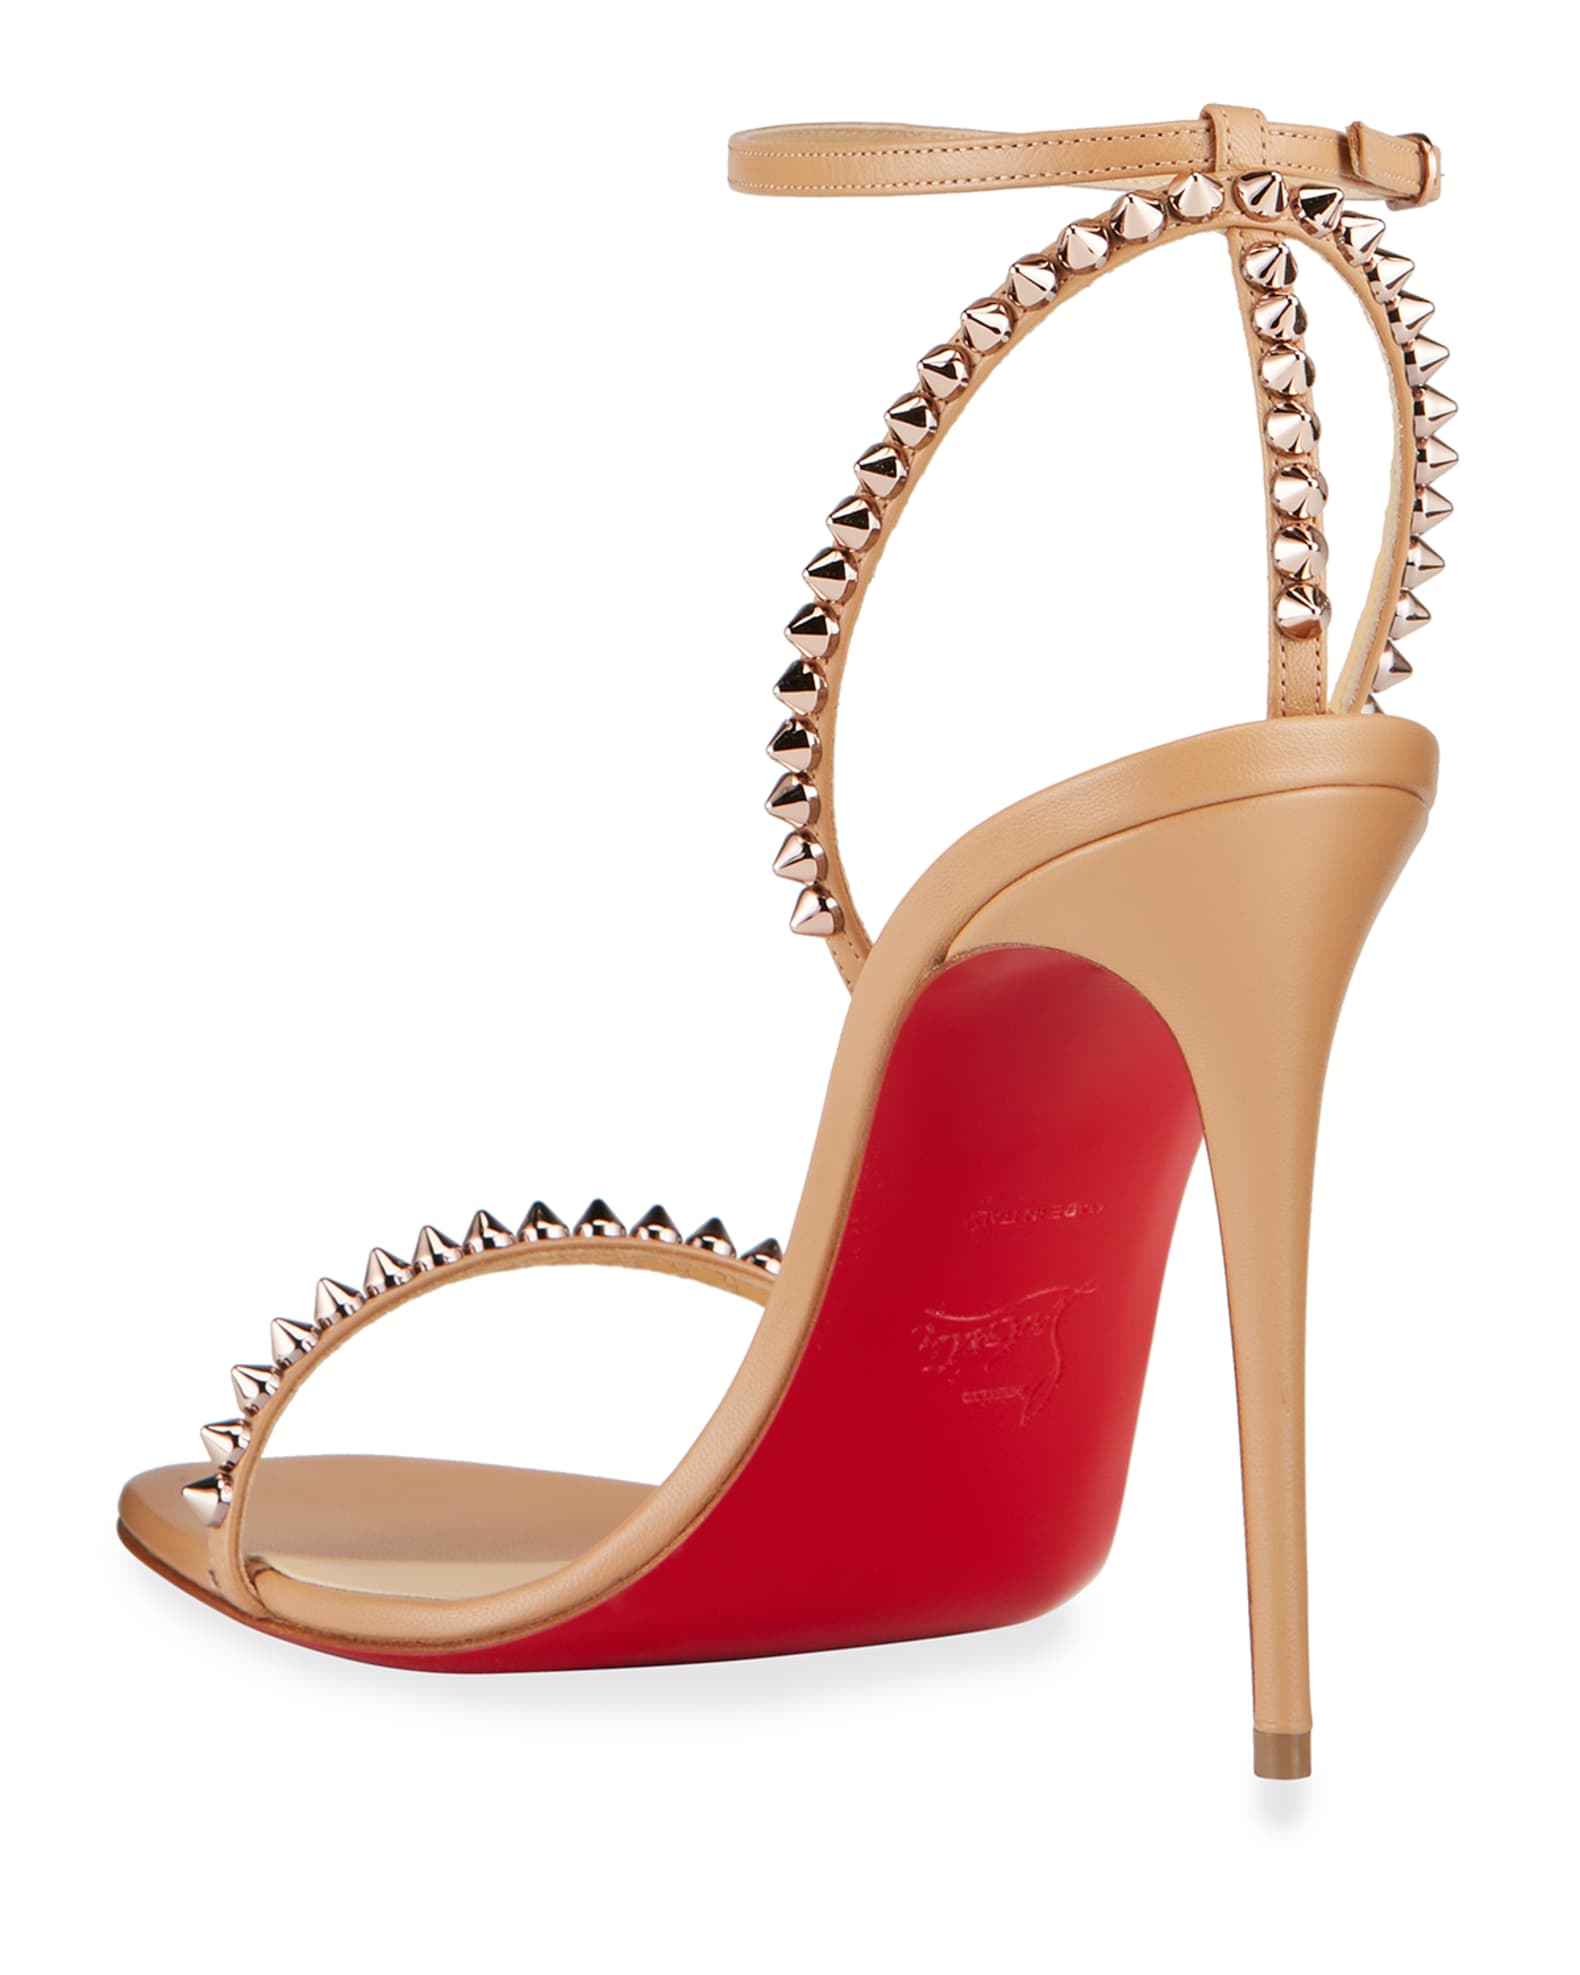 Christian Louboutin So Me Spike Red Sole Sandals | Neiman Marcus